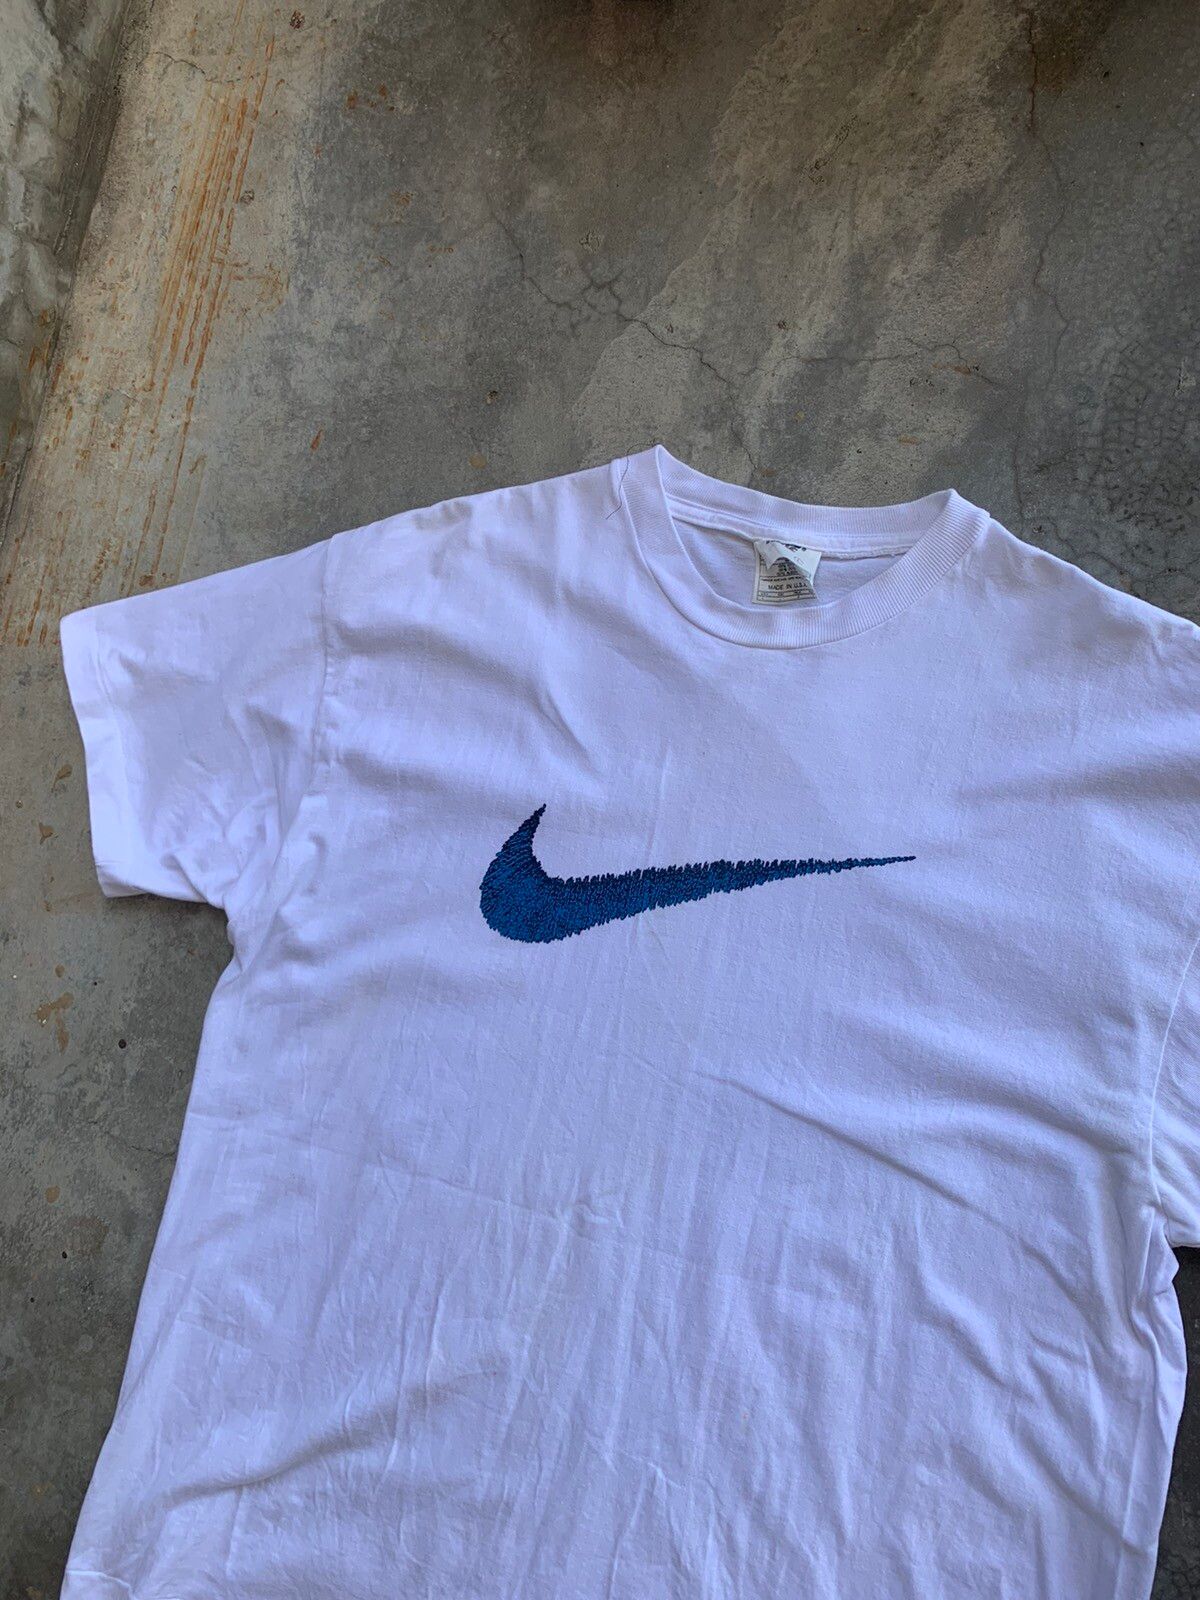 Vintage 90s Made In Usa Nike Swoosh Single Stich Tshirt - 2